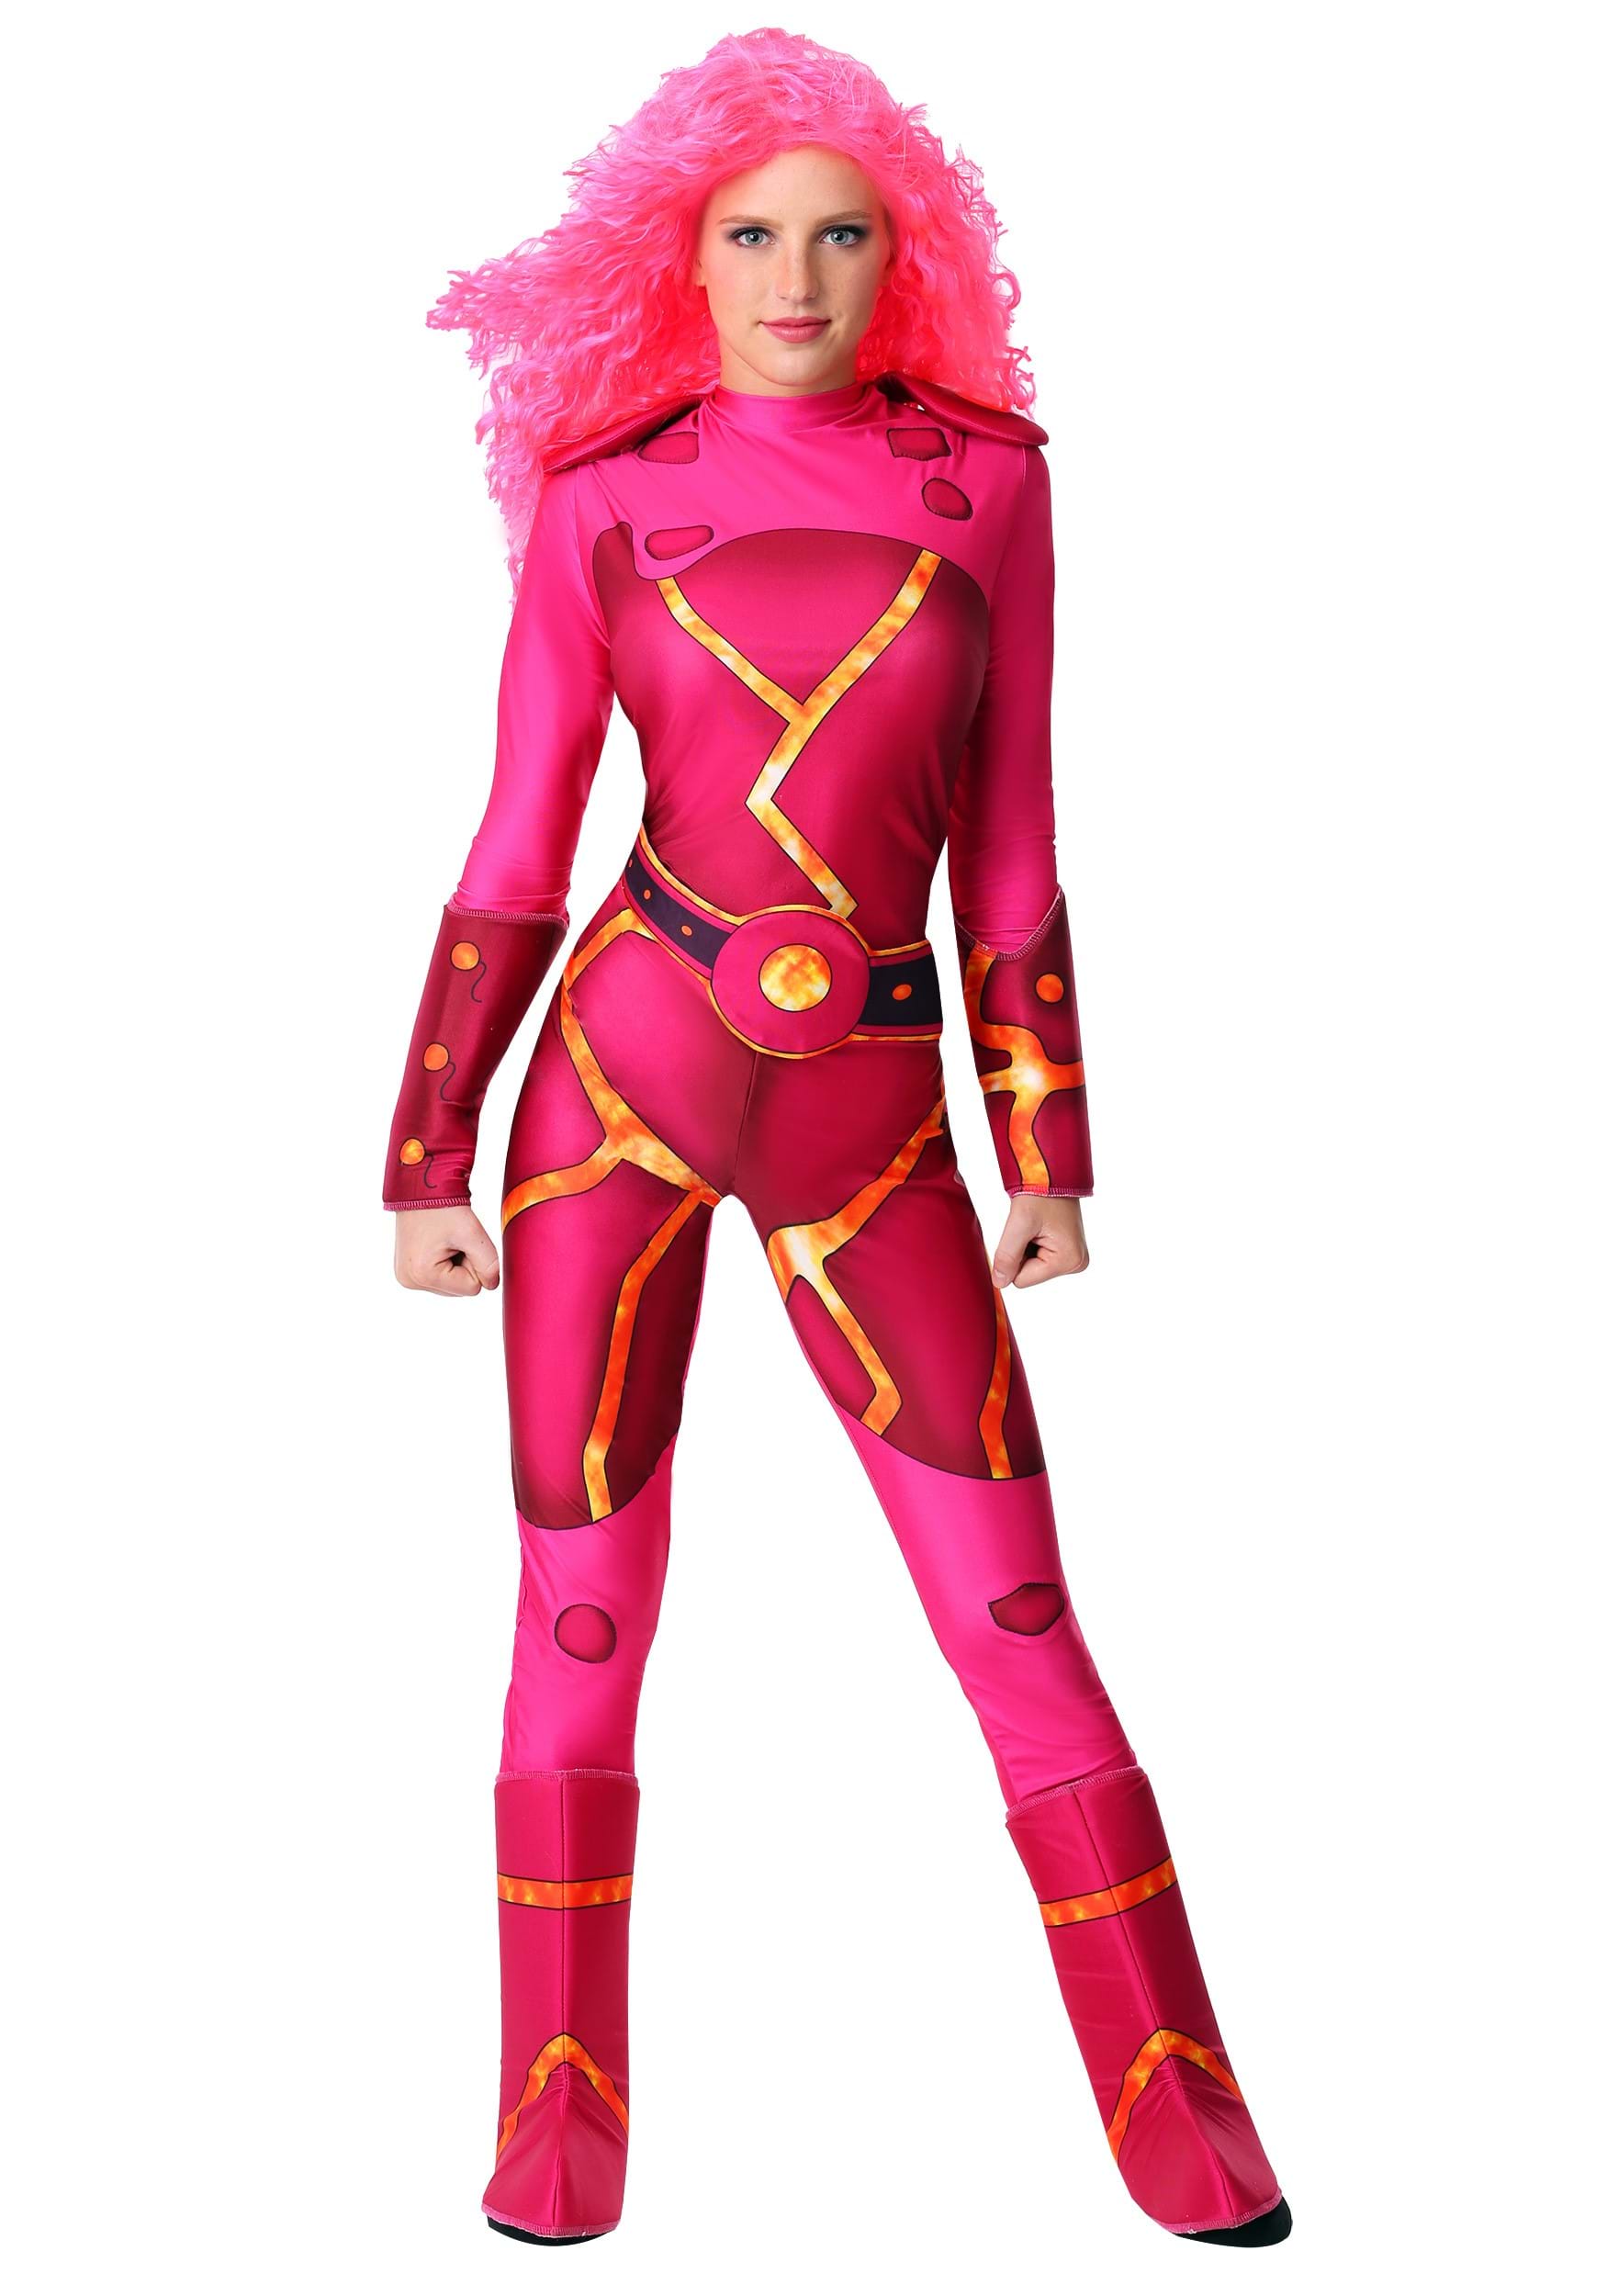 Lava Girl Costume for Adults